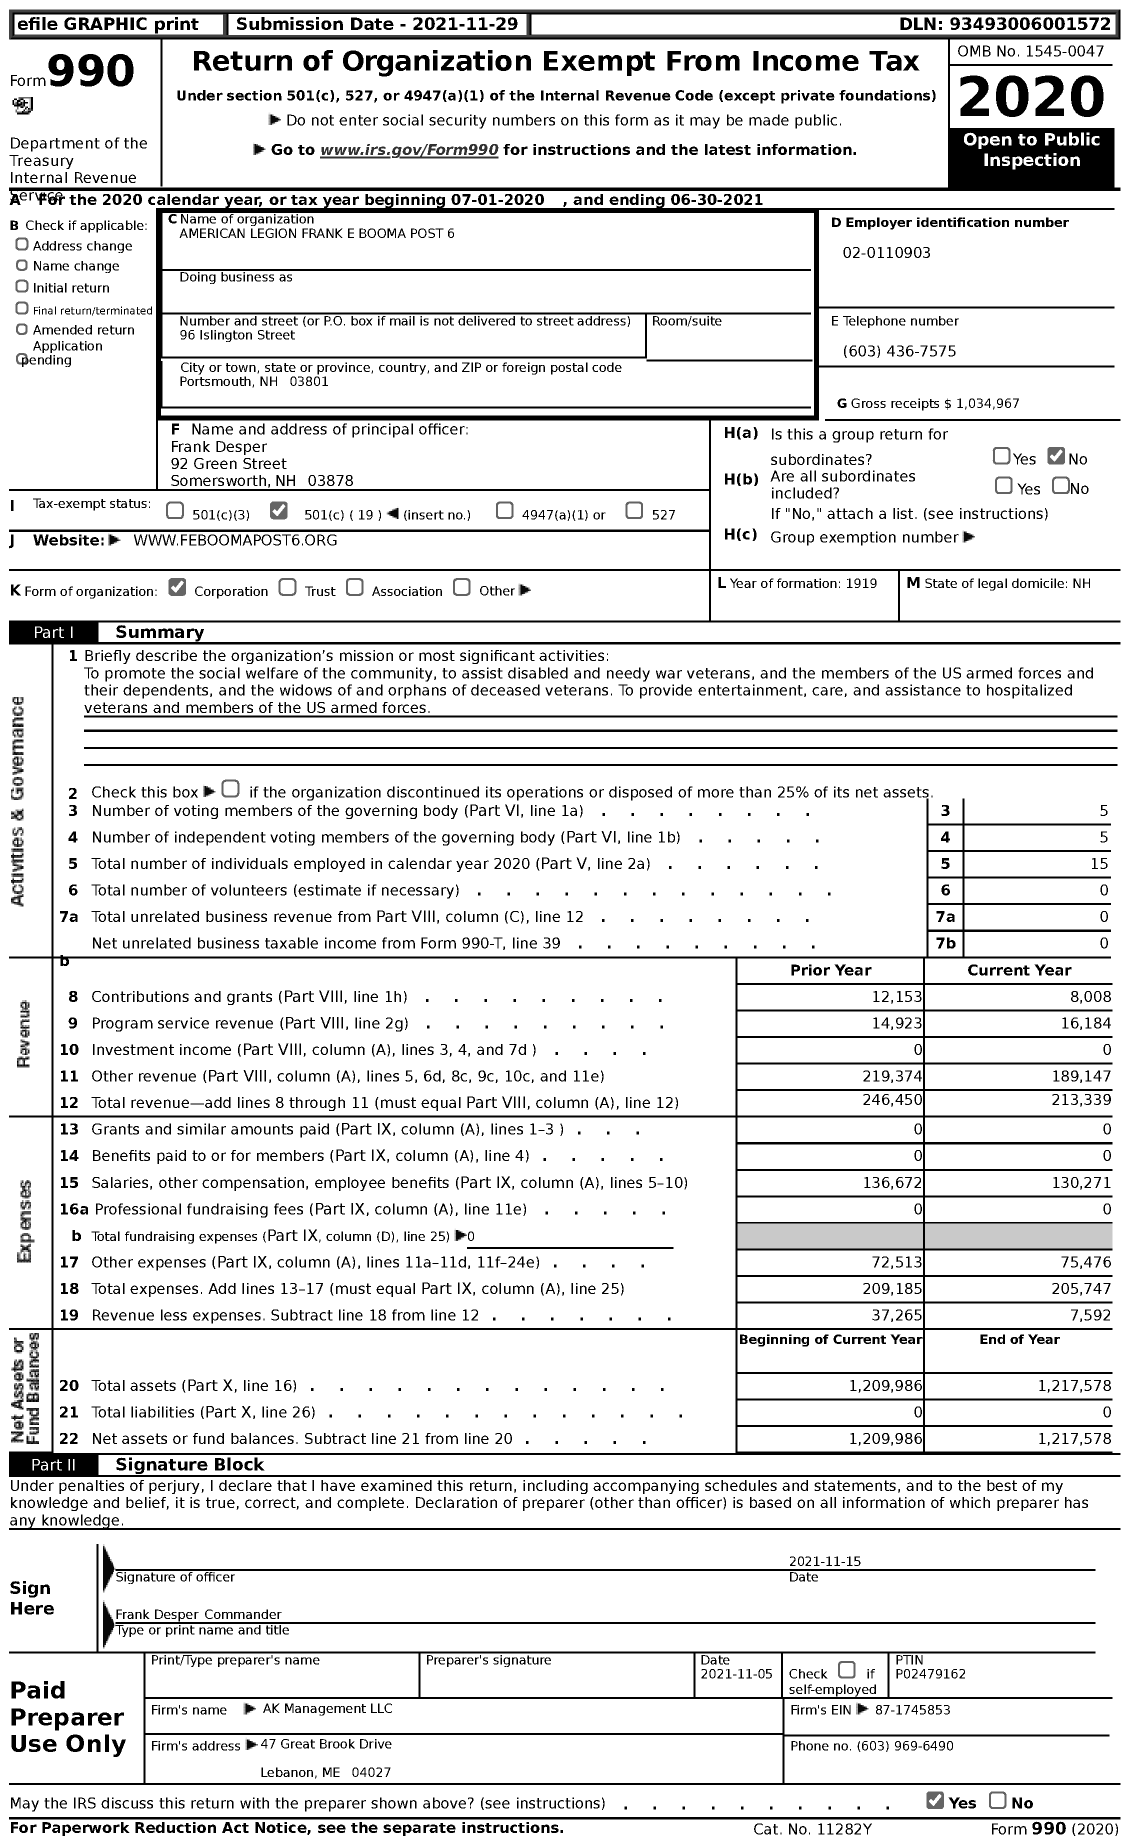 Image of first page of 2020 Form 990 for American Legion - Frank E Booma Inc Post 0006